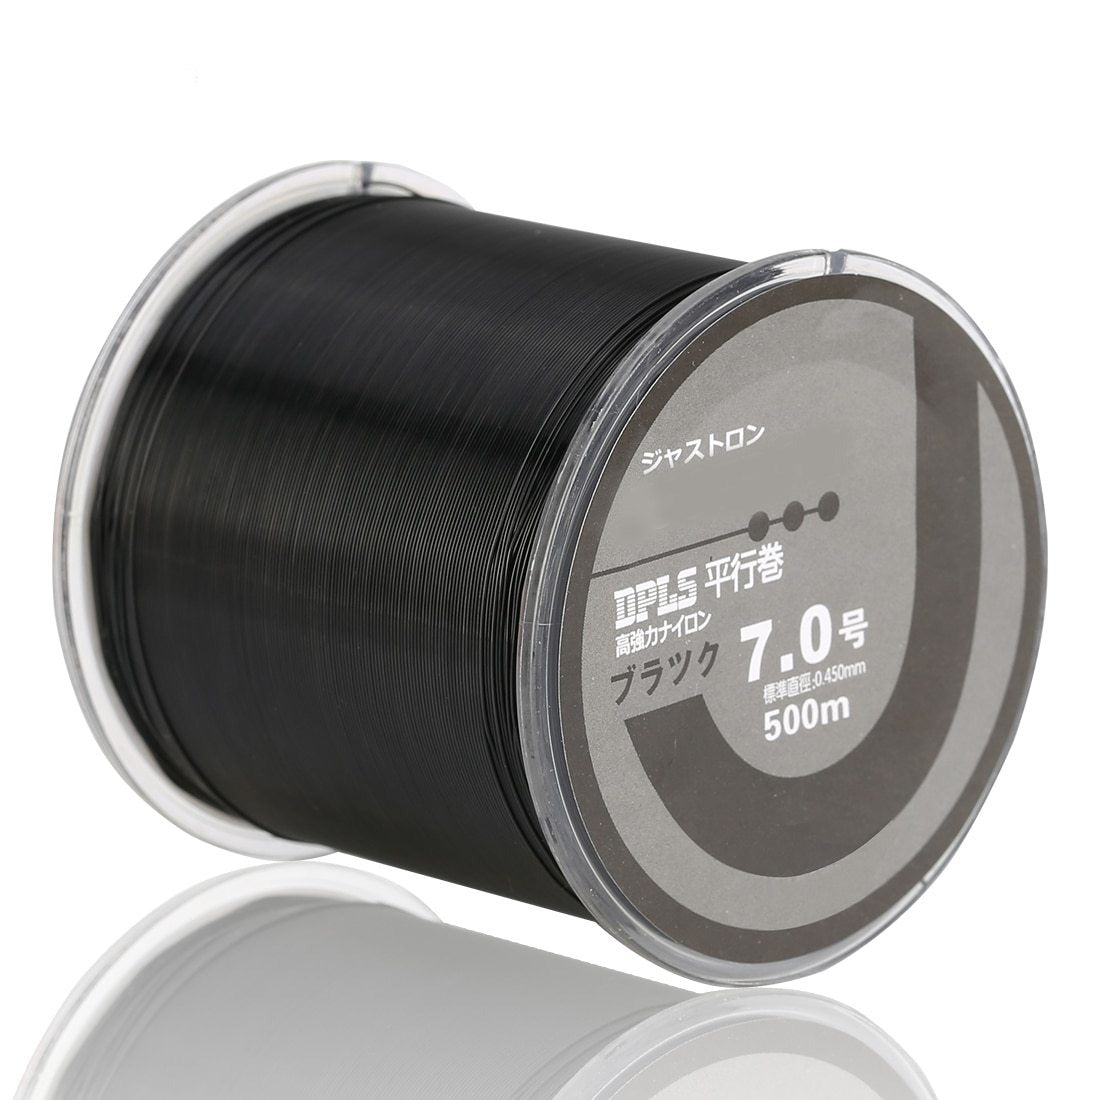 500M Clear Fishing Line Monofilament Nylon Lines For Hanging 0.165